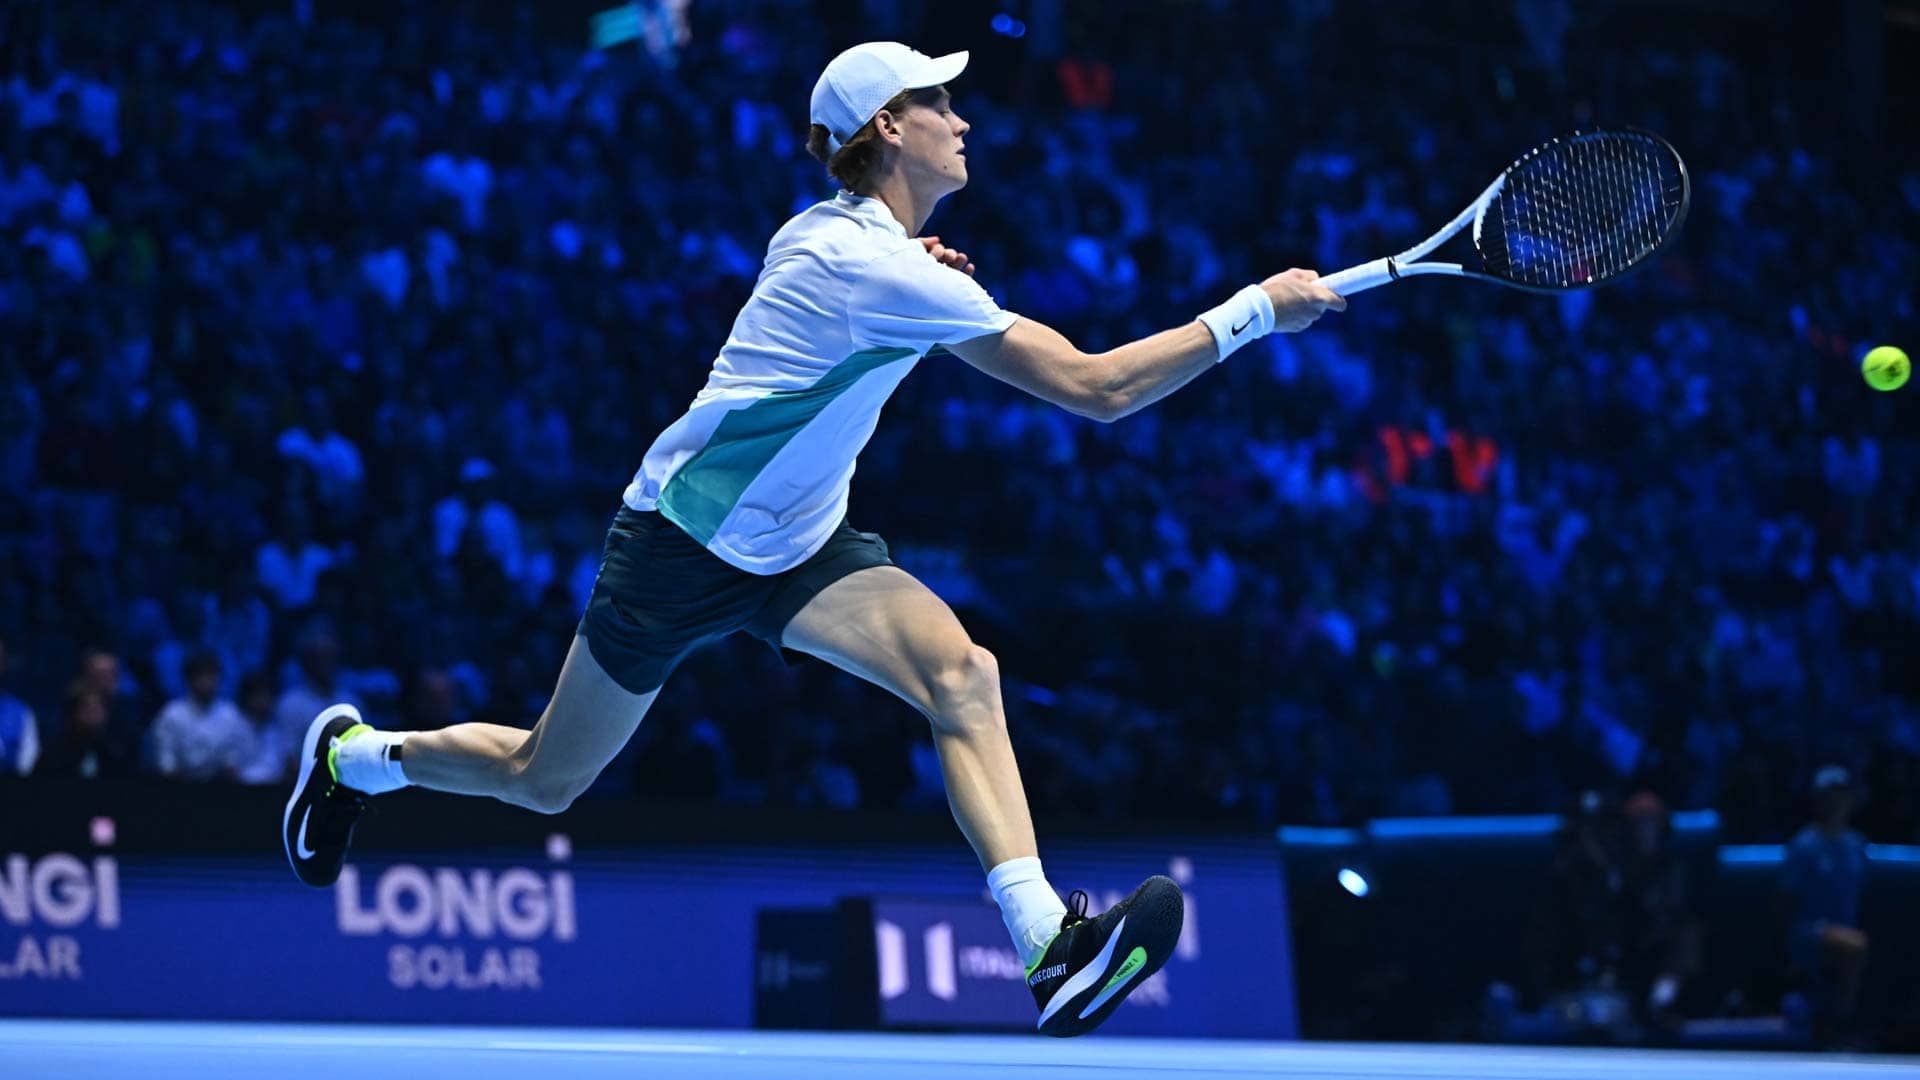 The partnership includes the Nitto ATP Finals, where this year local hero Jannik Sinner reached the final in Turin.